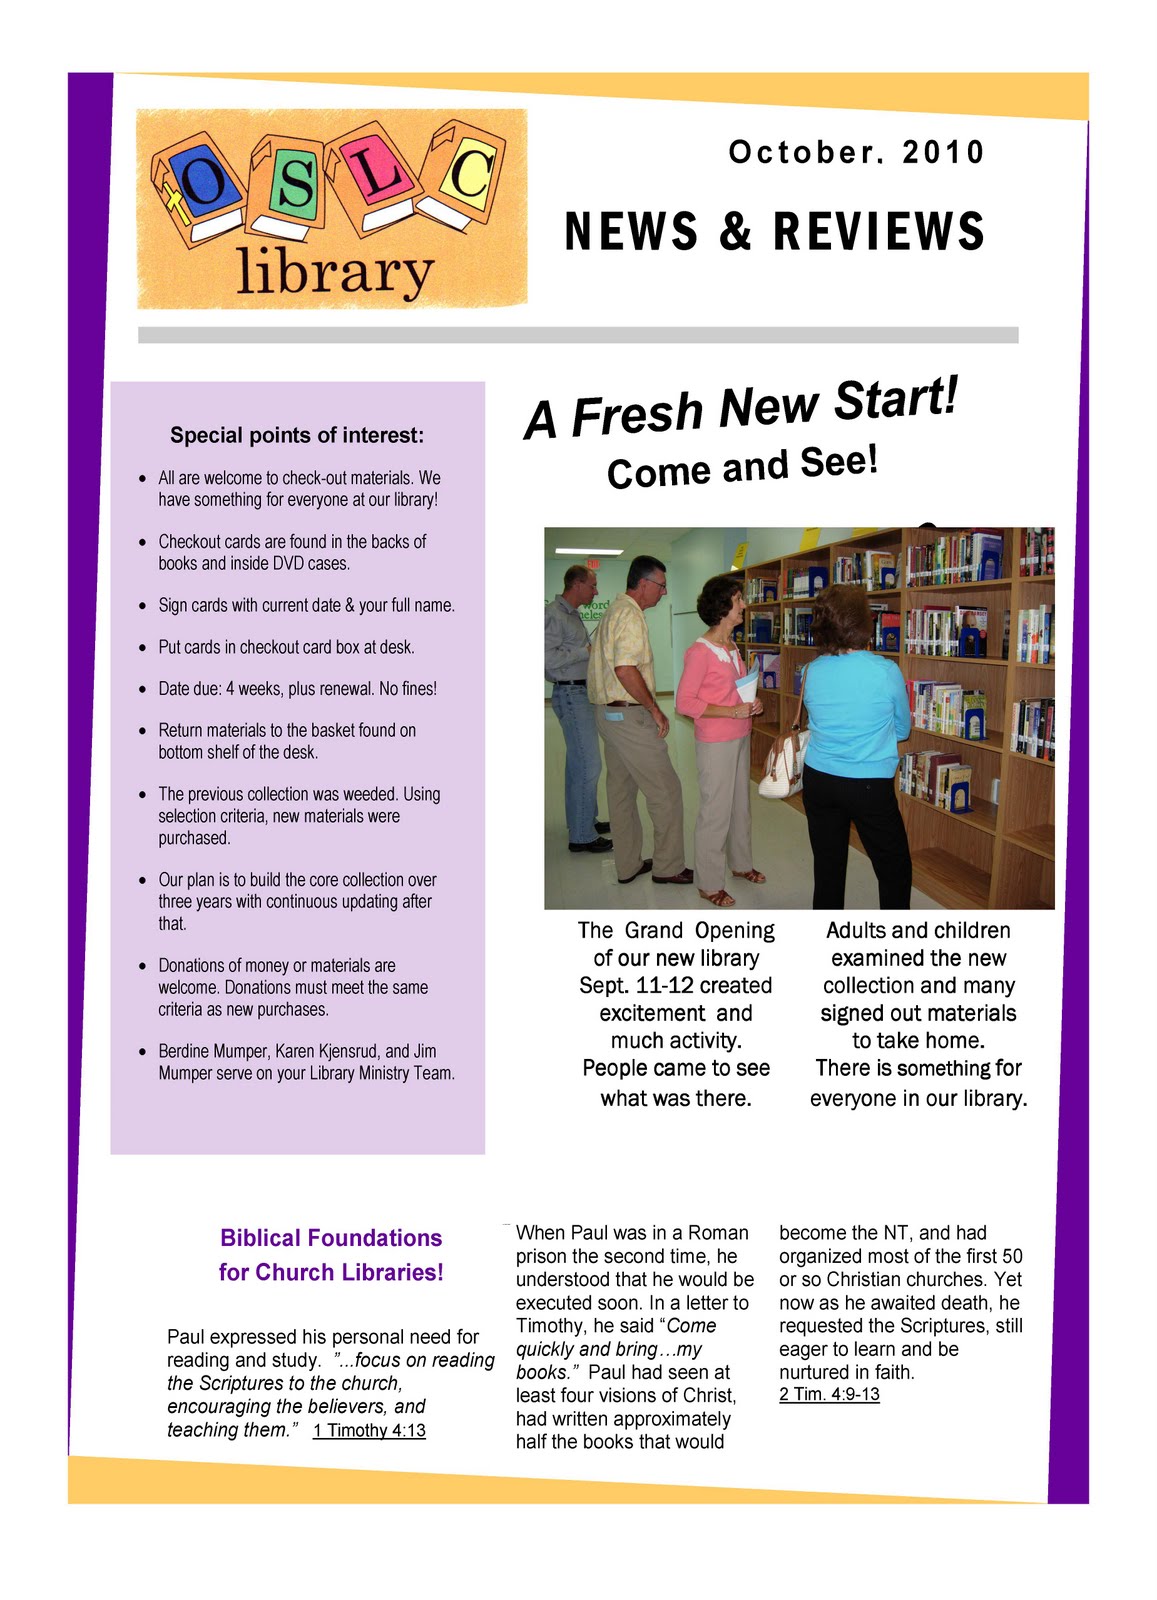 National Church Library Association Branches Blog: New Church Library ...